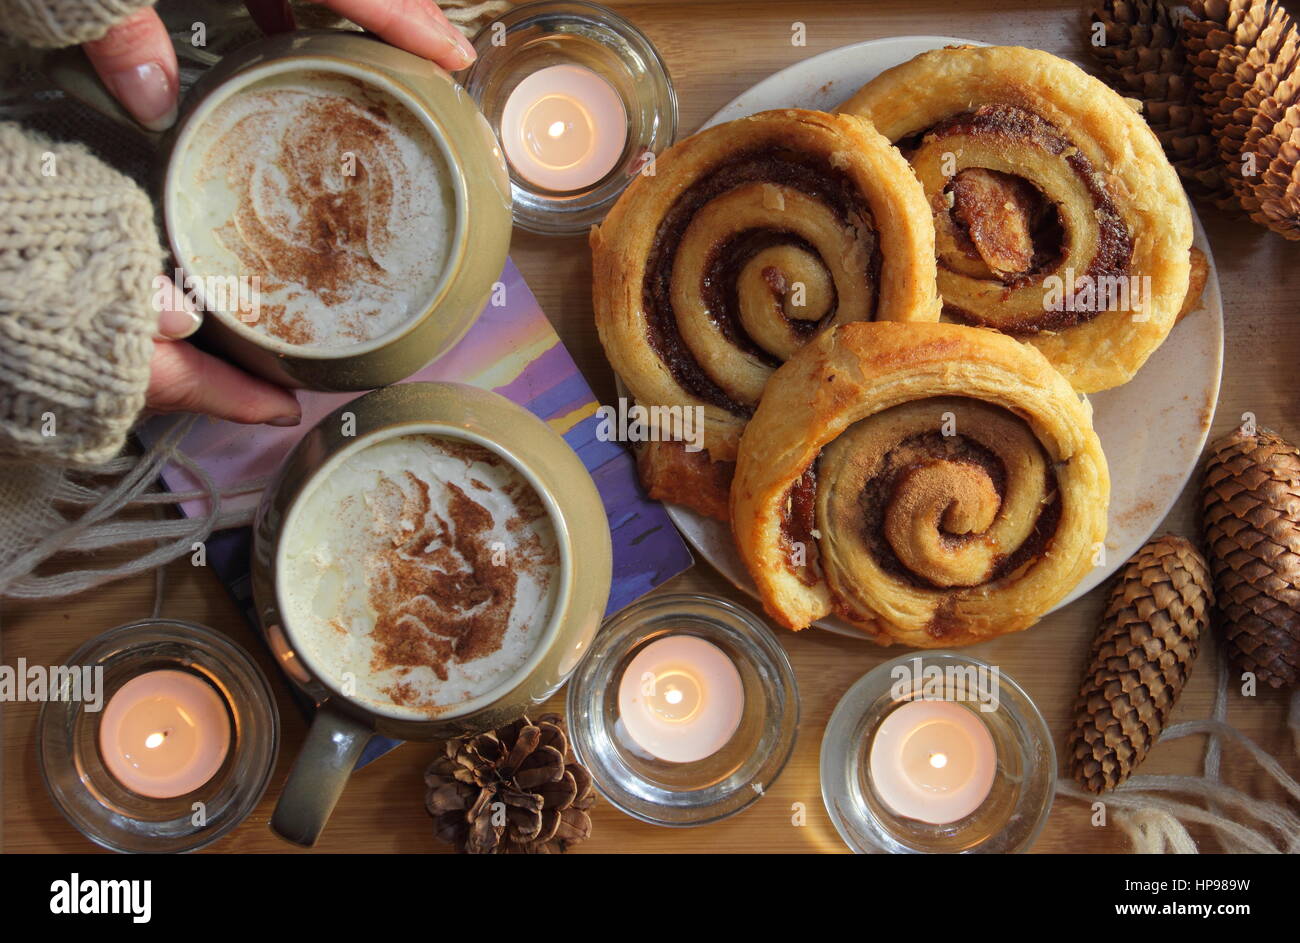 A woman reaches for a creamy mocha (coffee and chocolate) served with cinnamon buns) served by candle light in a cosy English home in winter Stock Photo